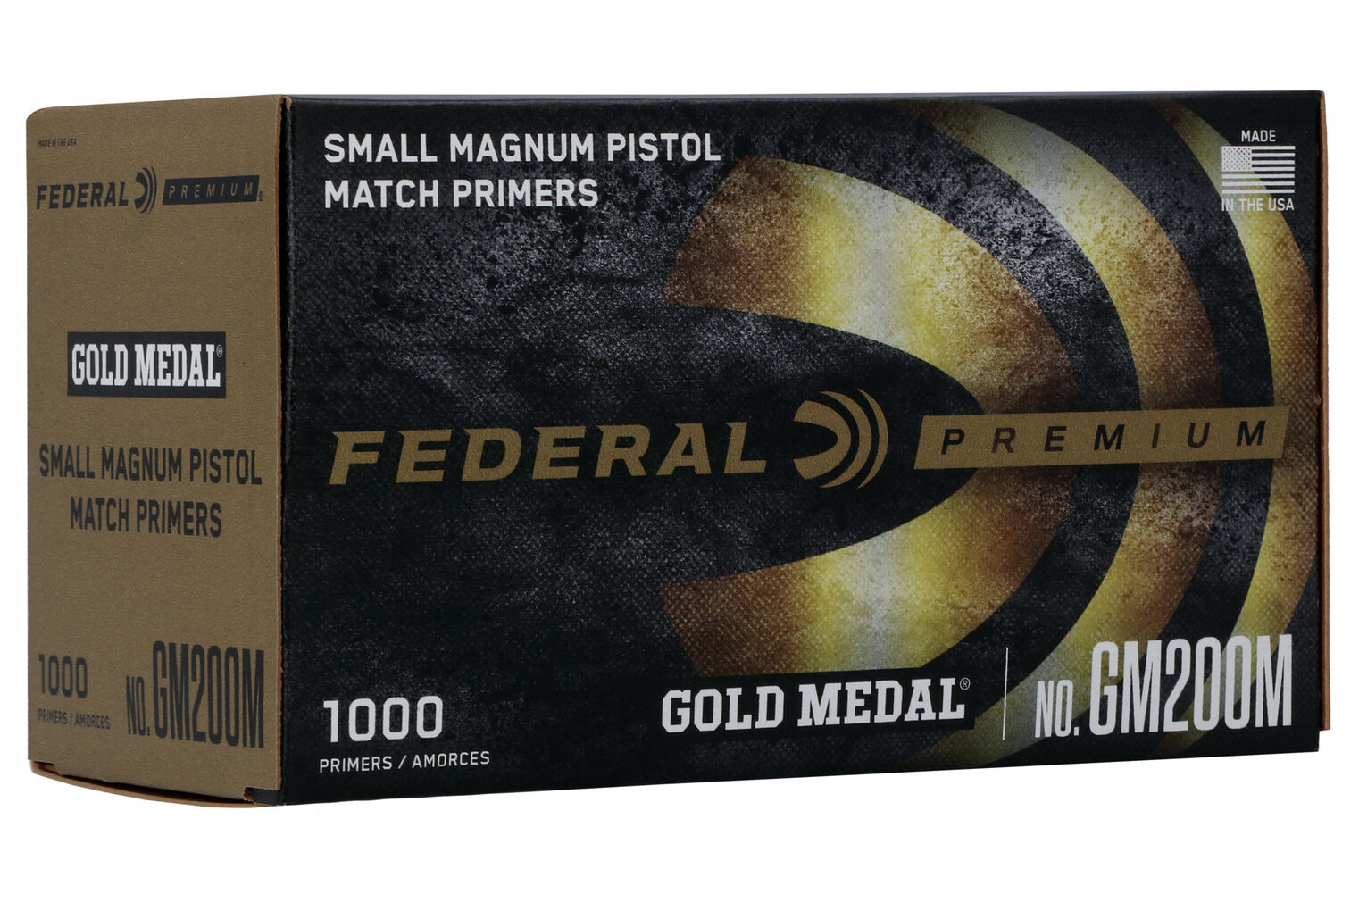 SMALL MAGNUM PISTOL MATCH PRIMERS (GOLD MEDAL) 1000/BOX